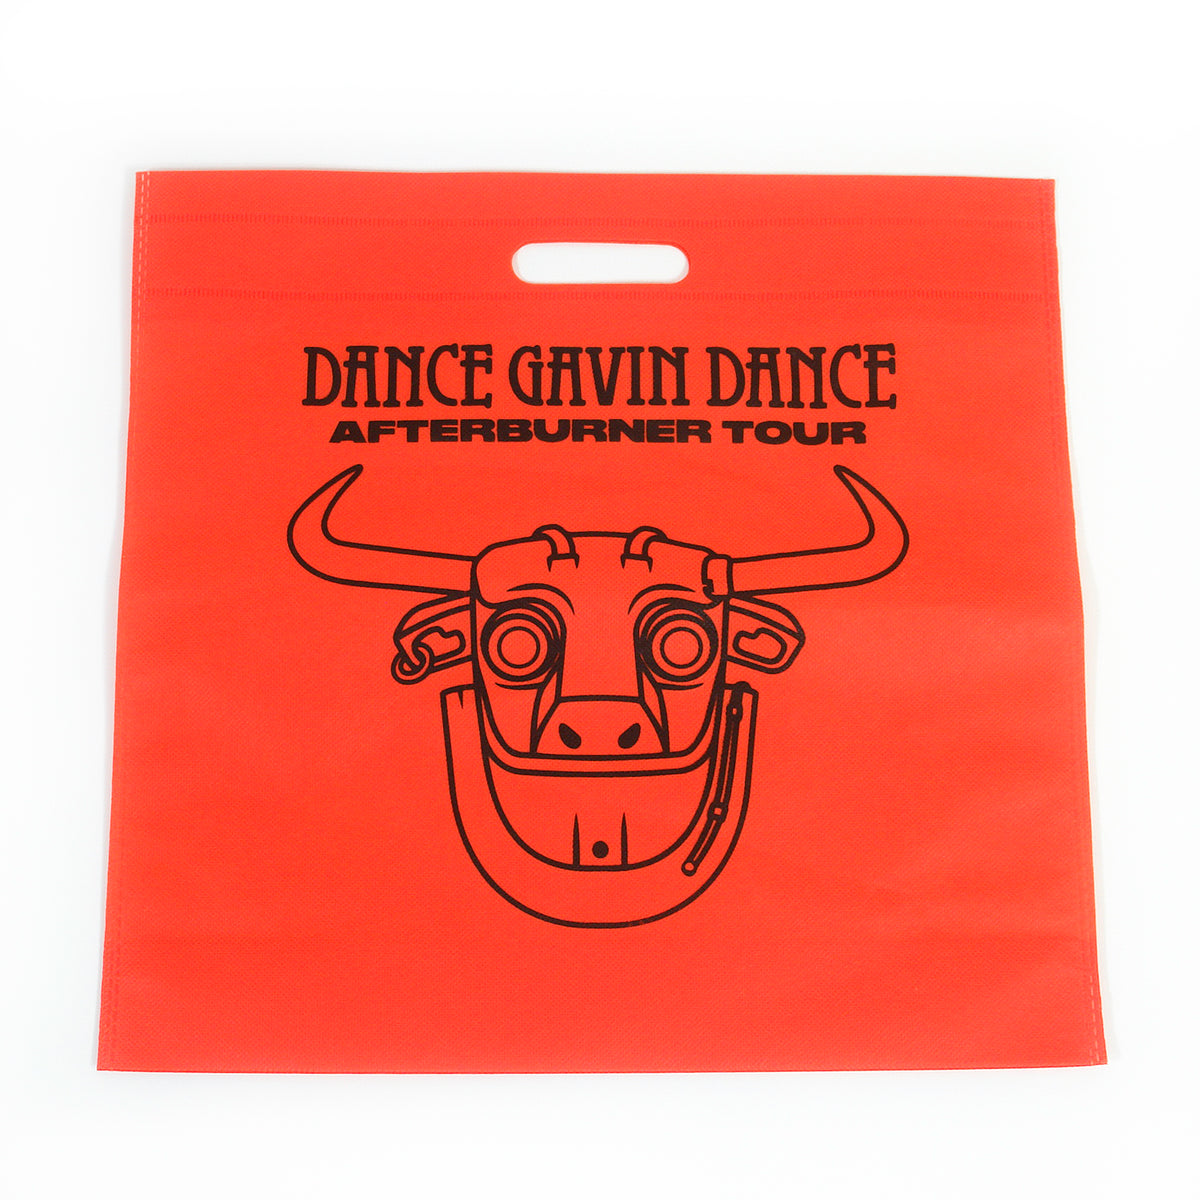 image if an orange canvas tote bag  on a white background. fell size bkack print of a robot bull's head. at the top says dance gavin dance afterburner tour